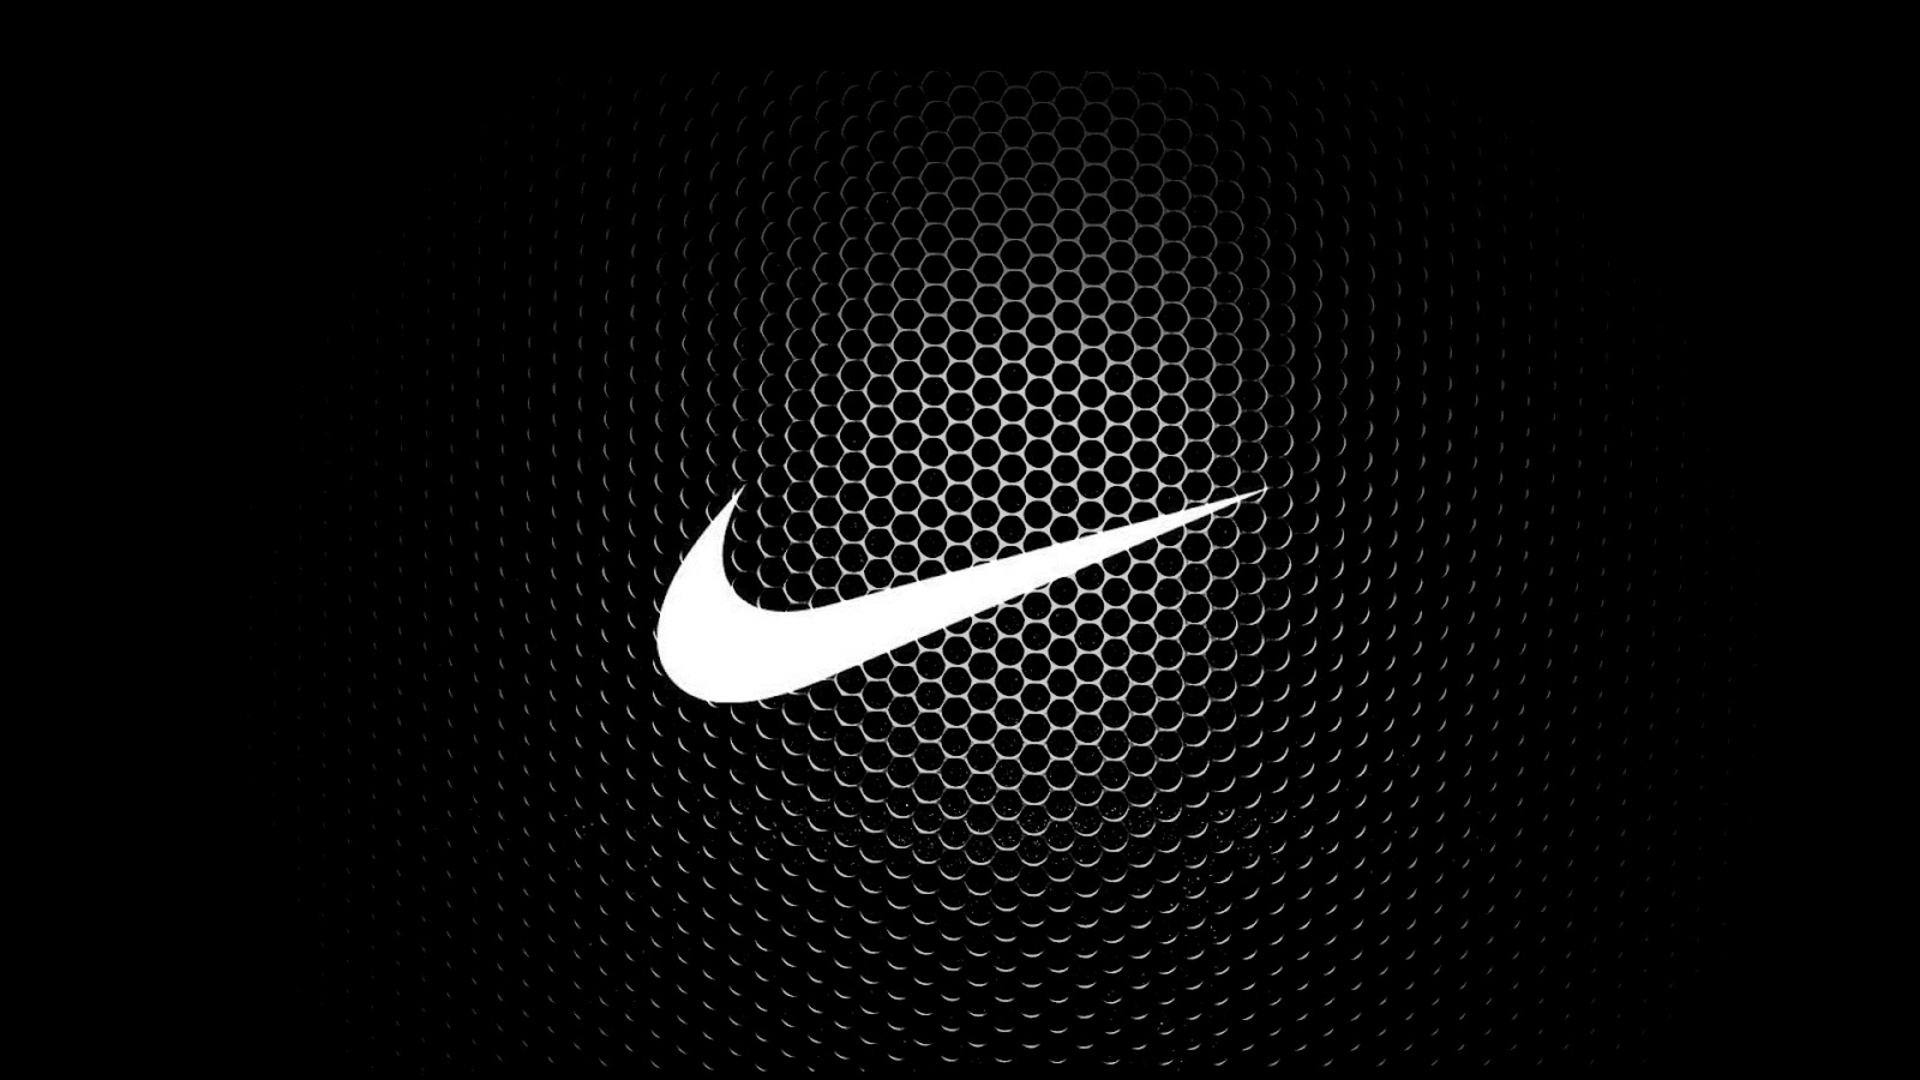 1378724 Nike wallpaper HD free wallpapers backgrounds images FHD